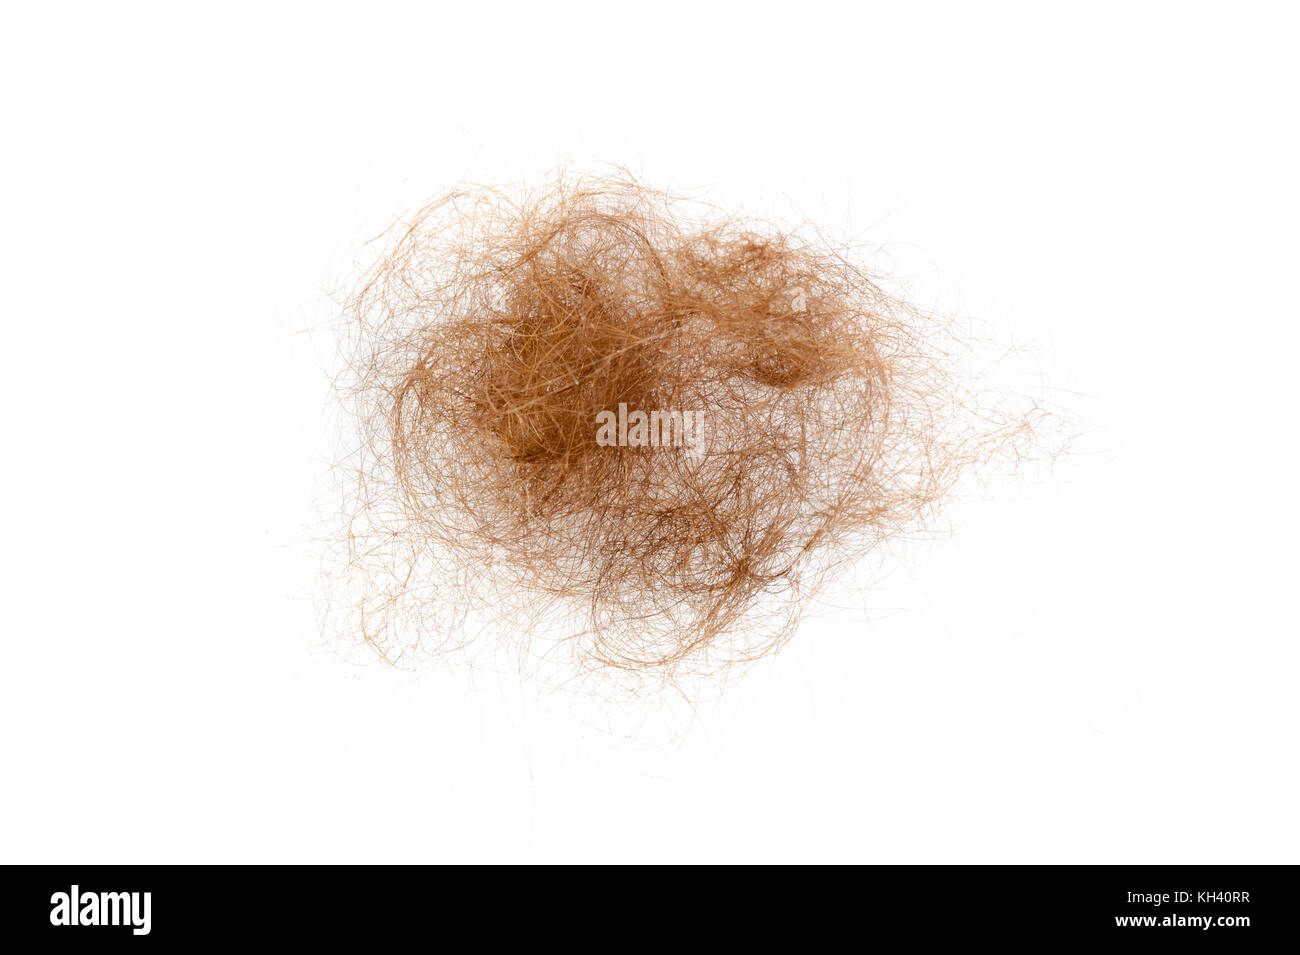 Bunch of hair. Hair loss concept Stock Photo